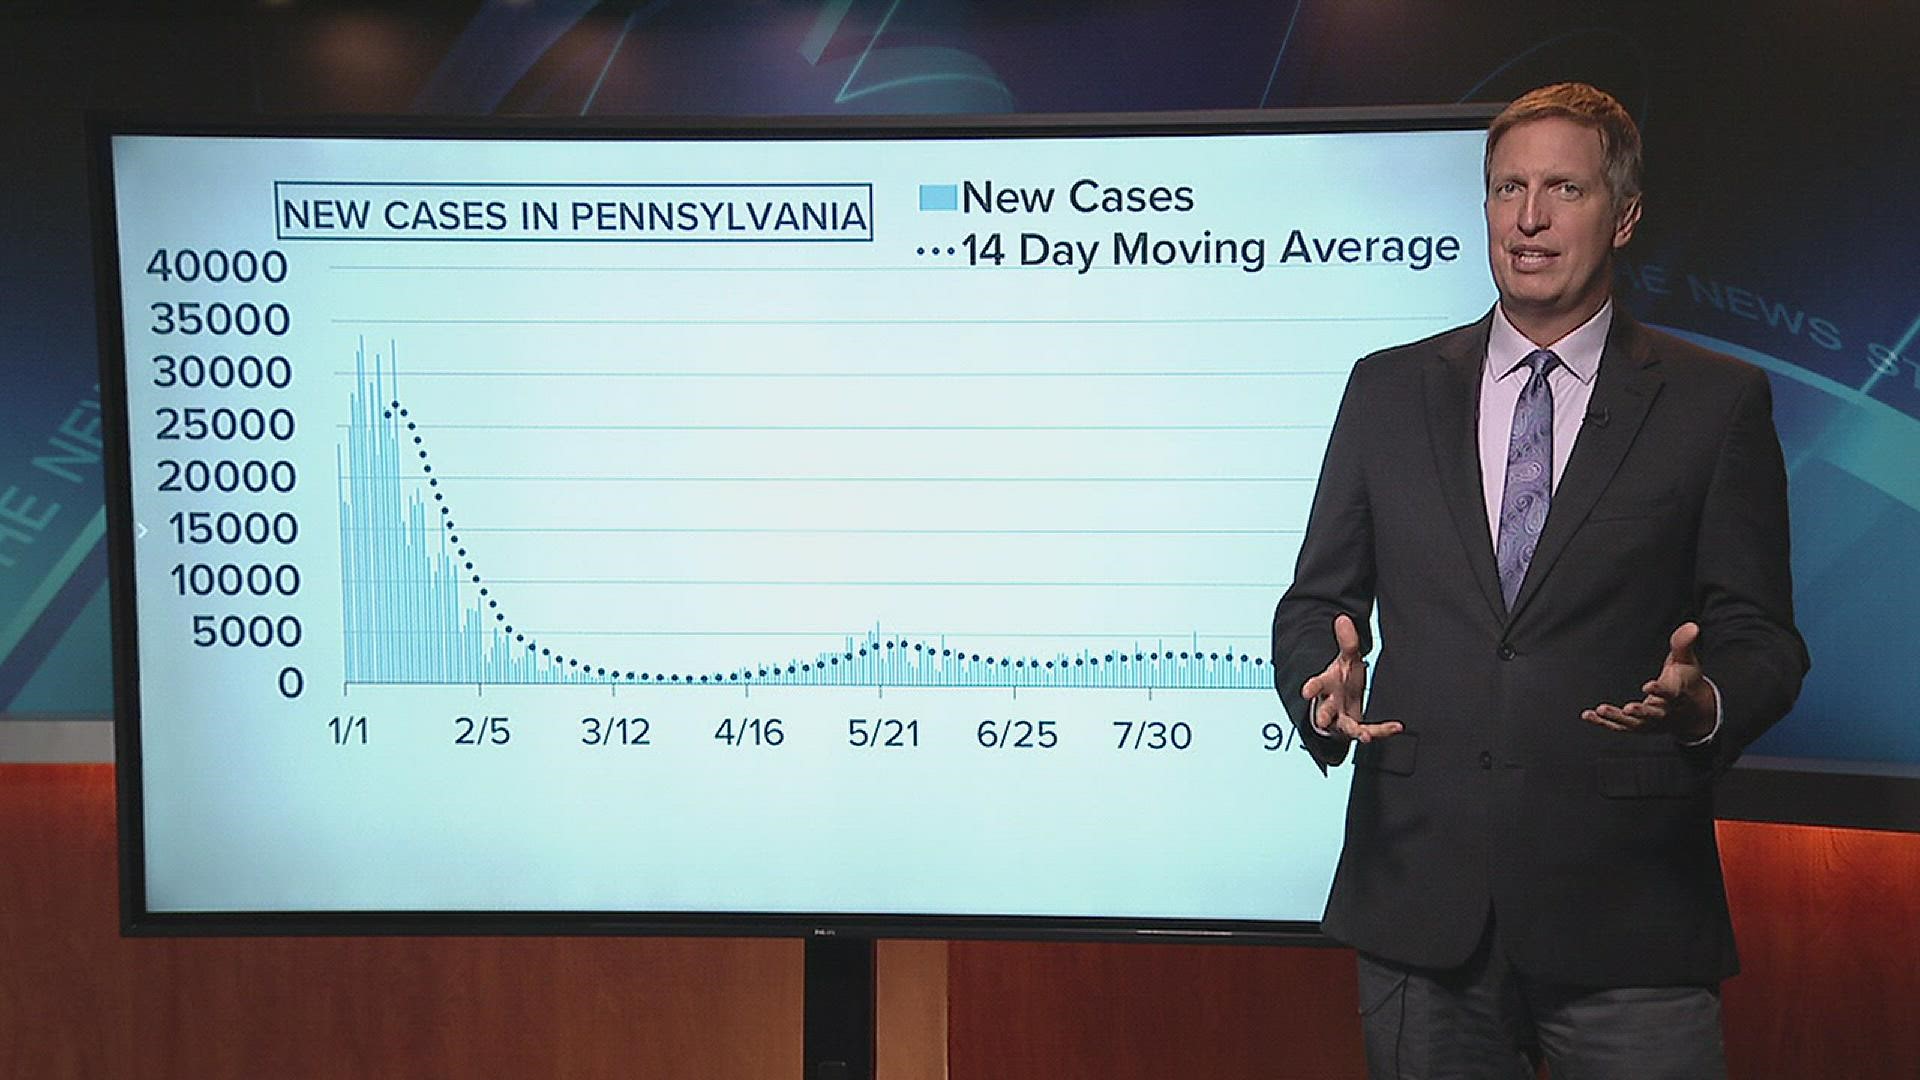 Newswatch 16's Jon Meyer offers some analysis of last week's COVID-19 data from the state.